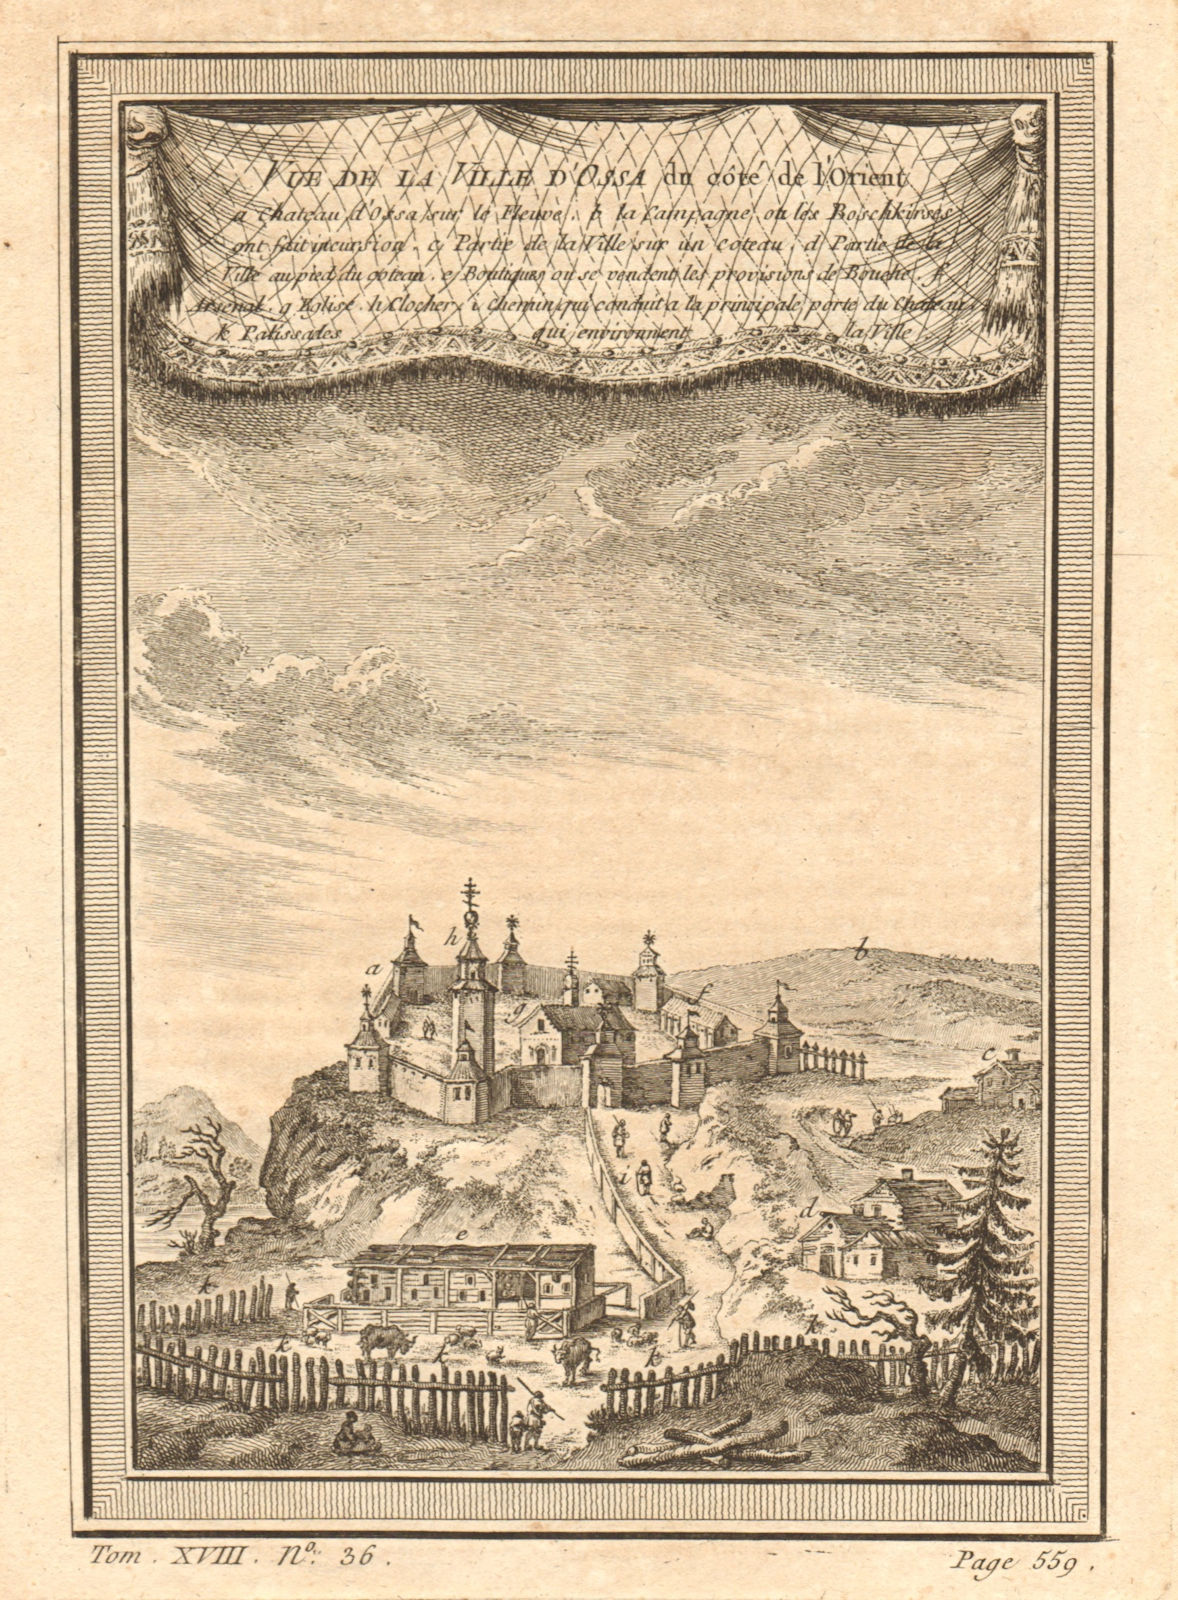 View of the town of Osa, Perm Krai, from the east side. Siberia, Russia 1768